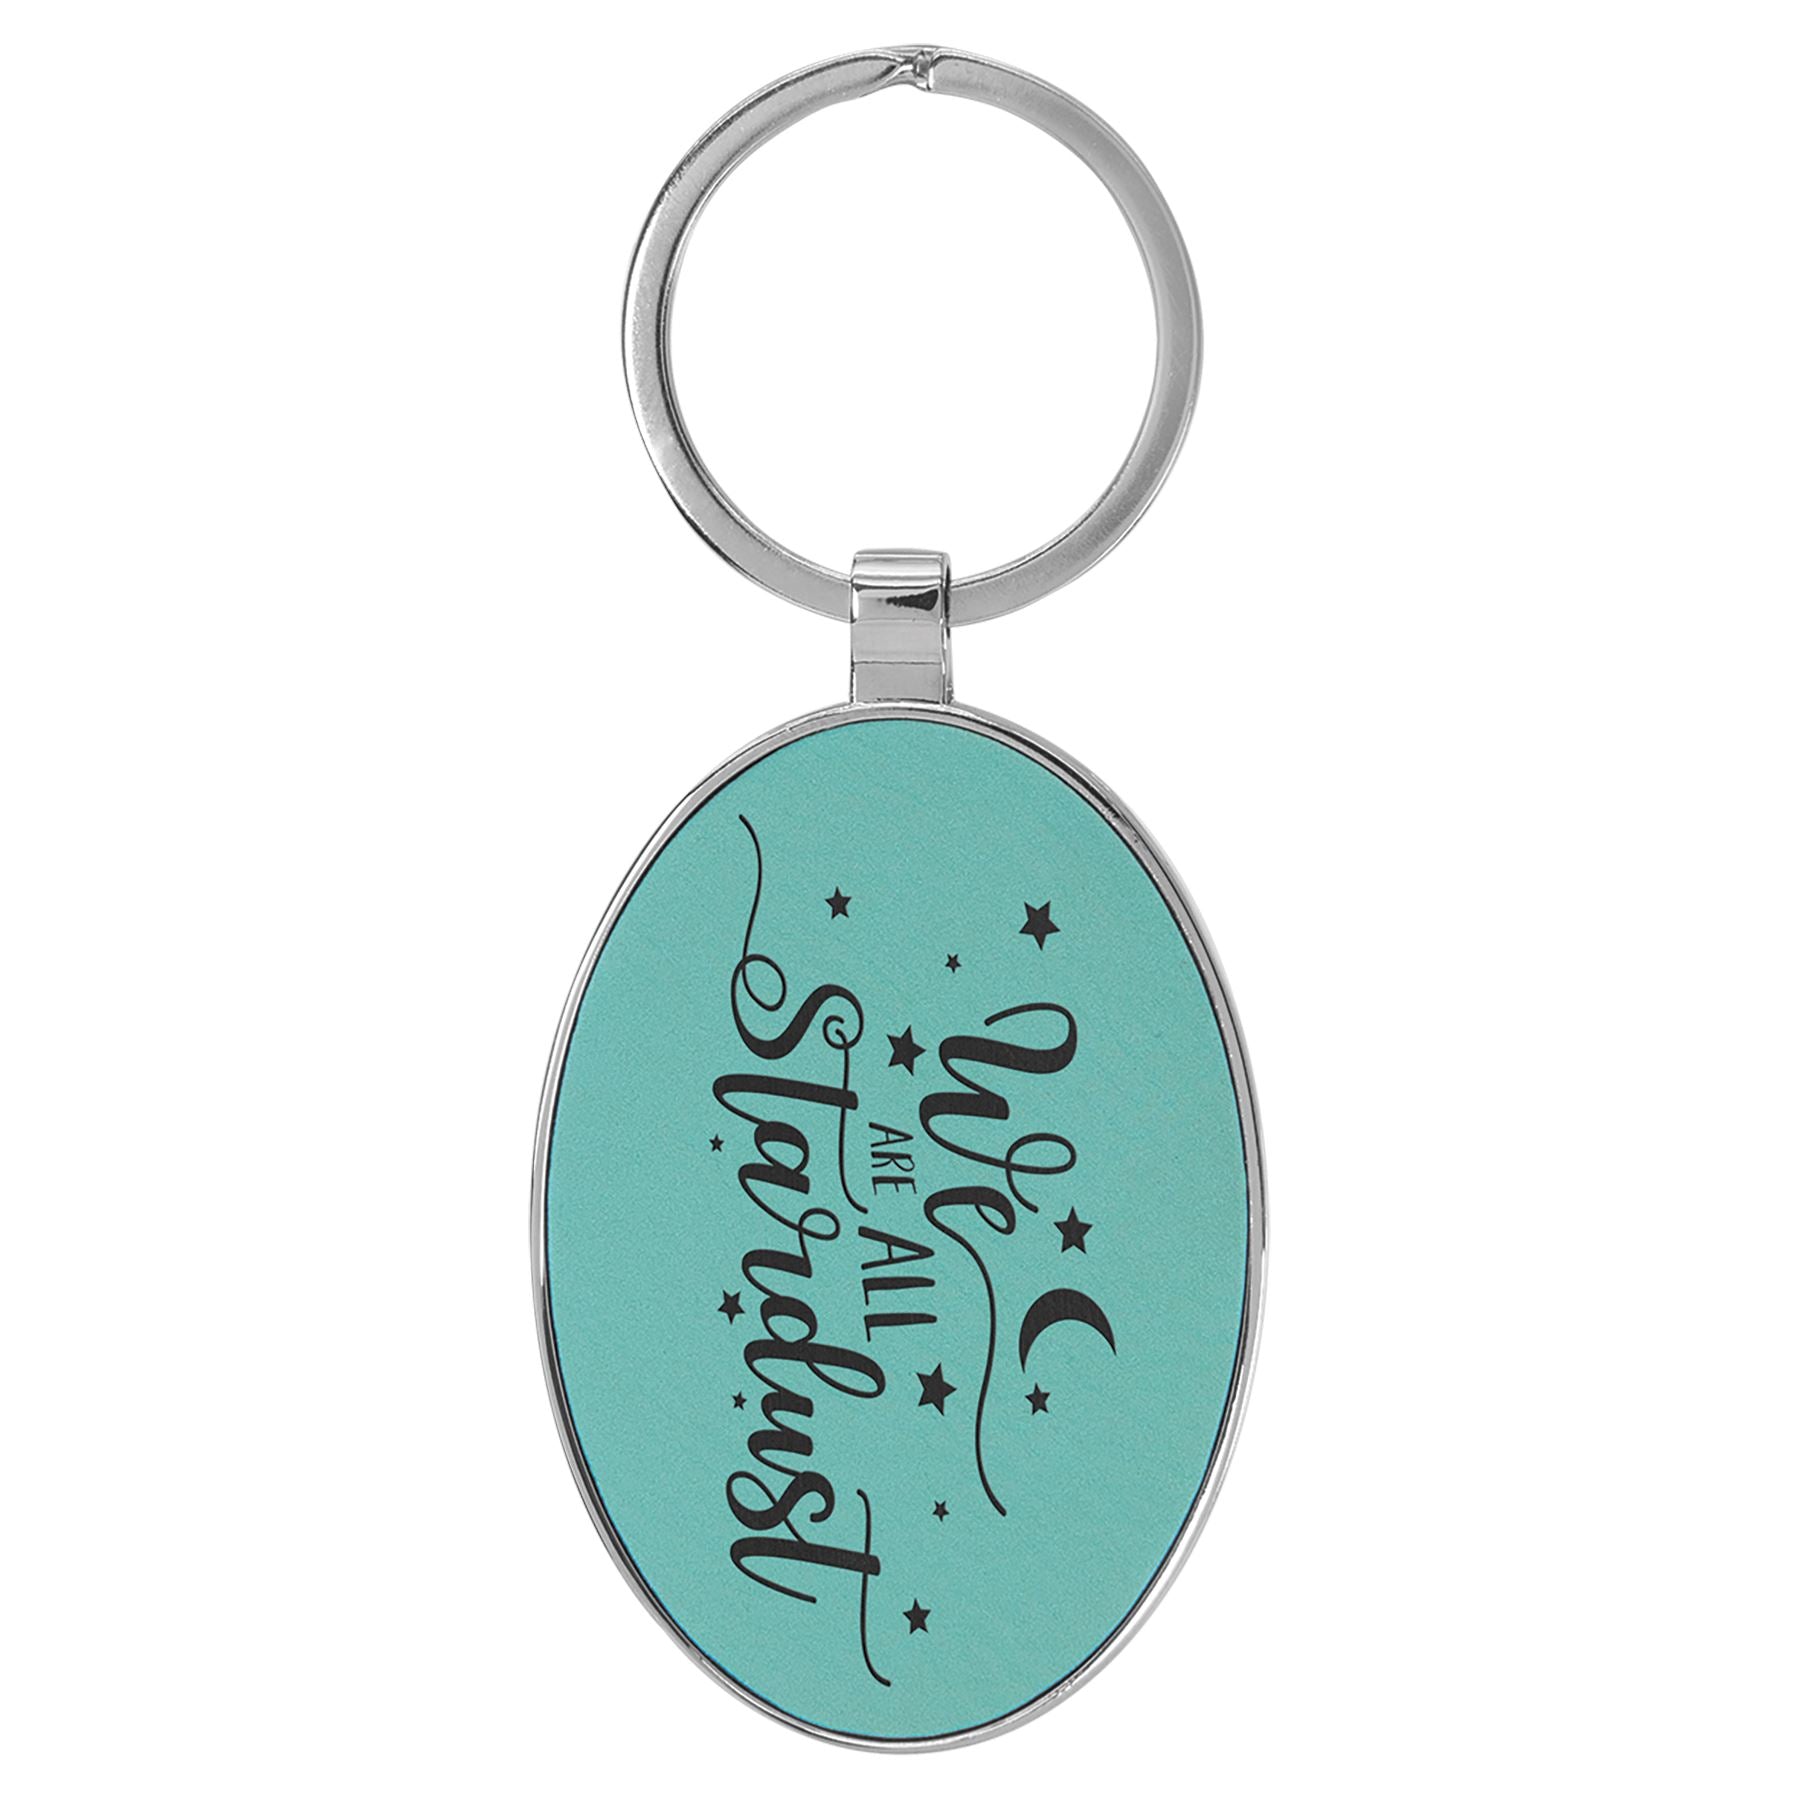 Oval Shaped Metal Keychain w/Leatherette, 3" x 1 3/4", Laser Engraved Keychain Craftworks NW Teal/Black 1-Side 